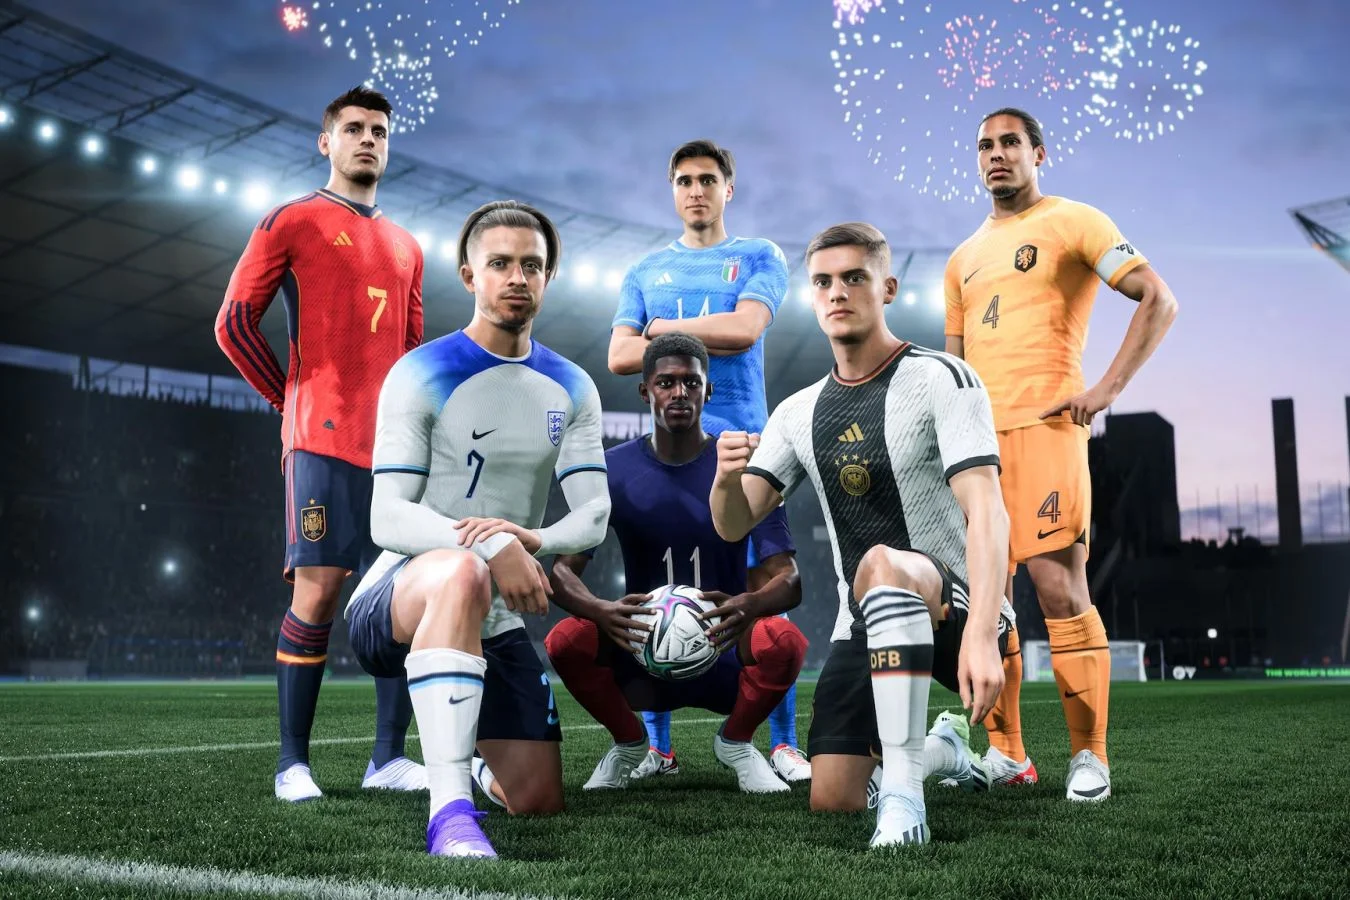 EA Sports FC 24 gets an update in honor of the UEFA Euro-2024